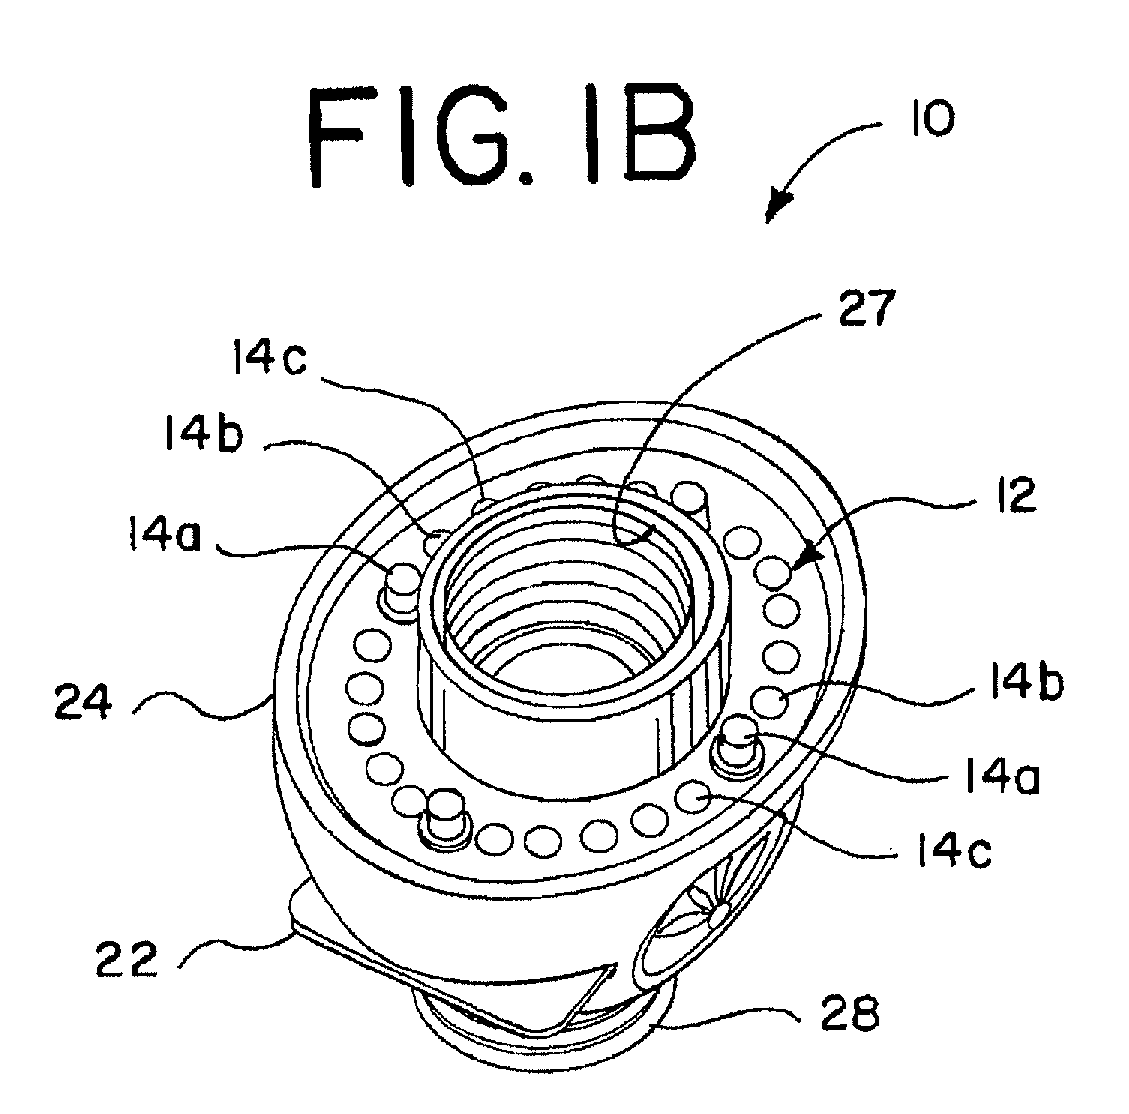 Adapter for Light Bulbs Equipped with Volatile Active Dispenser and Light Emitting Diodes